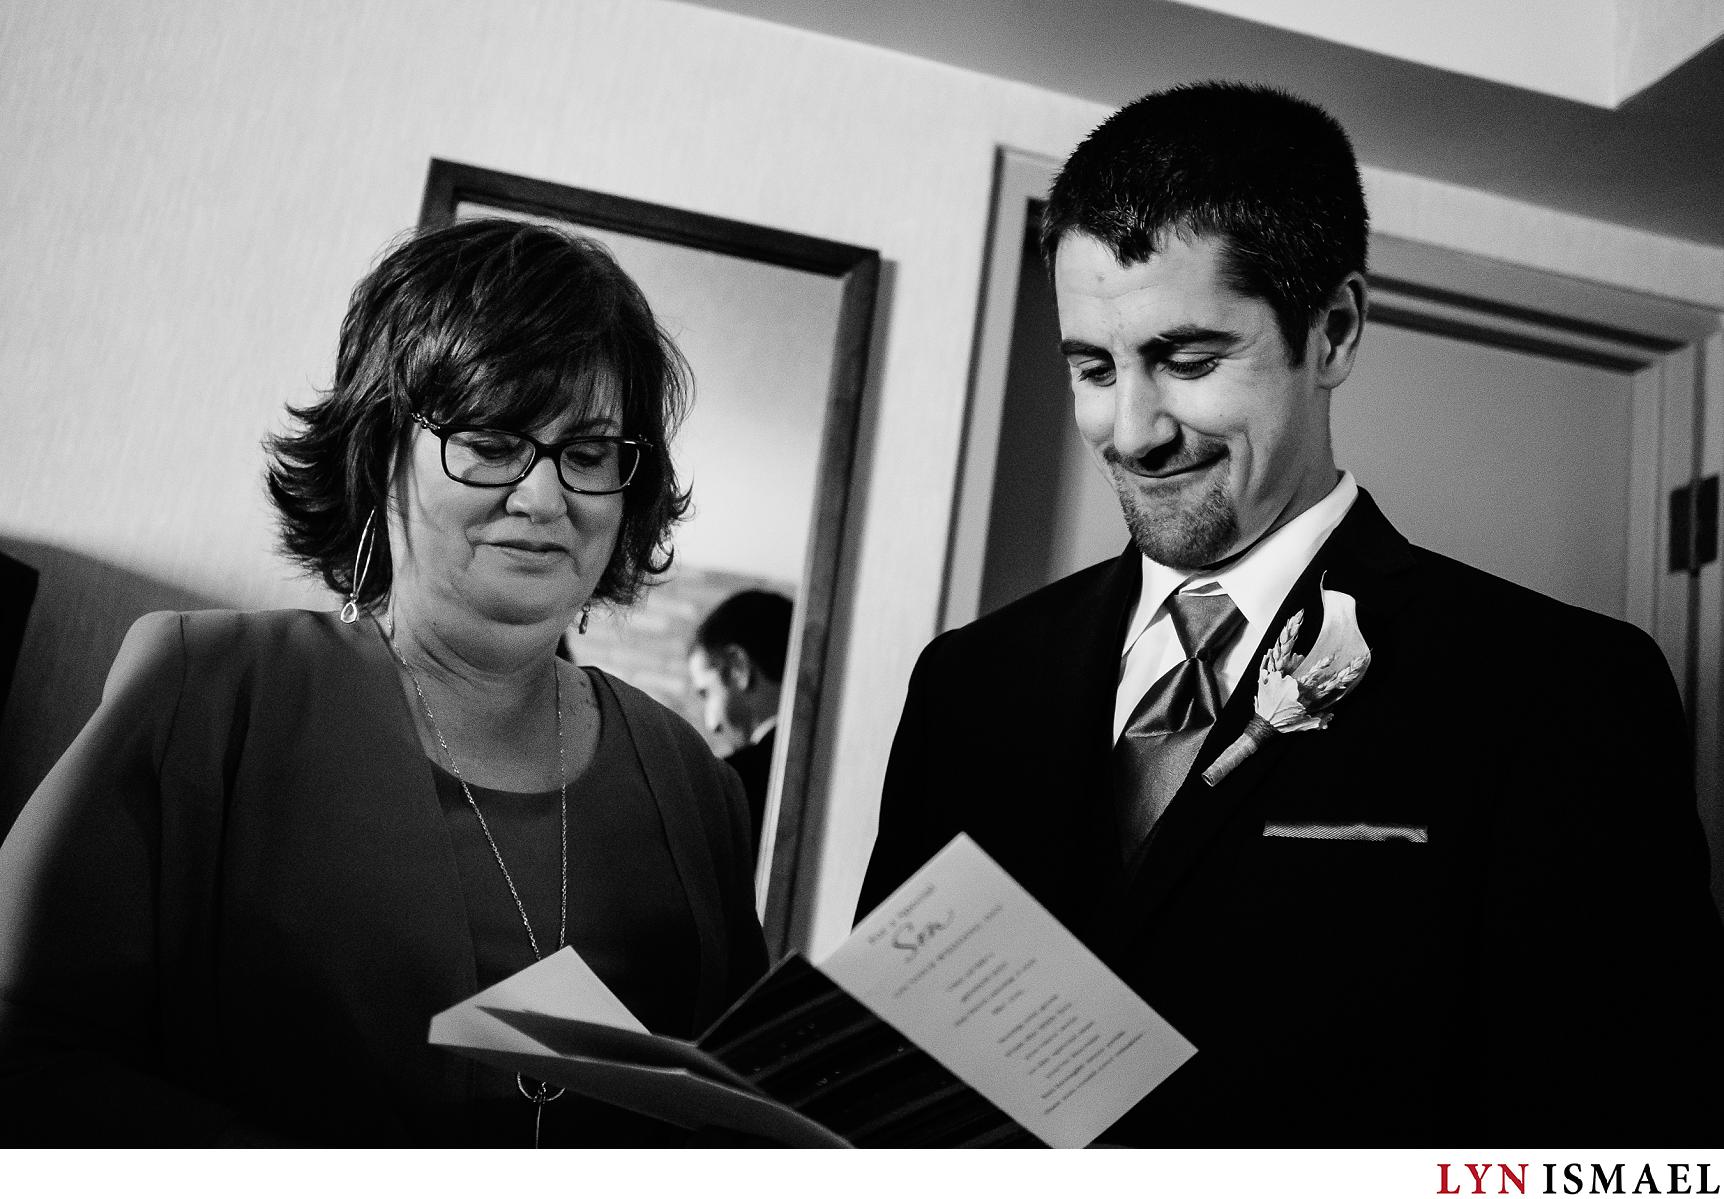 Groom reading a card given by his mother in the morning of his wedding